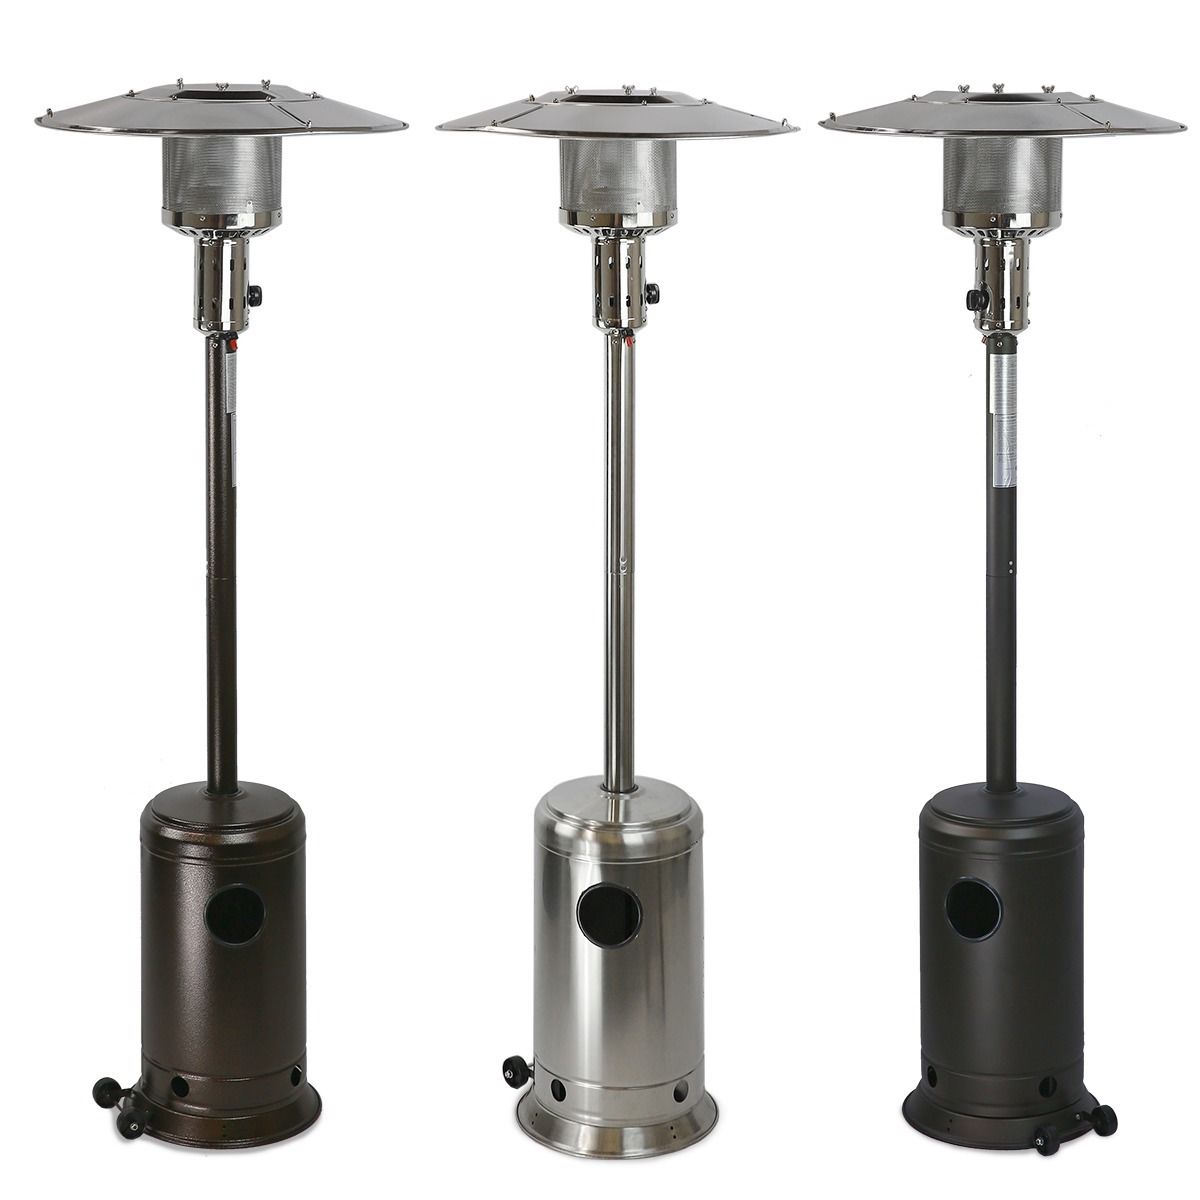 Standing Propane Patio Heater Down to $109.99!